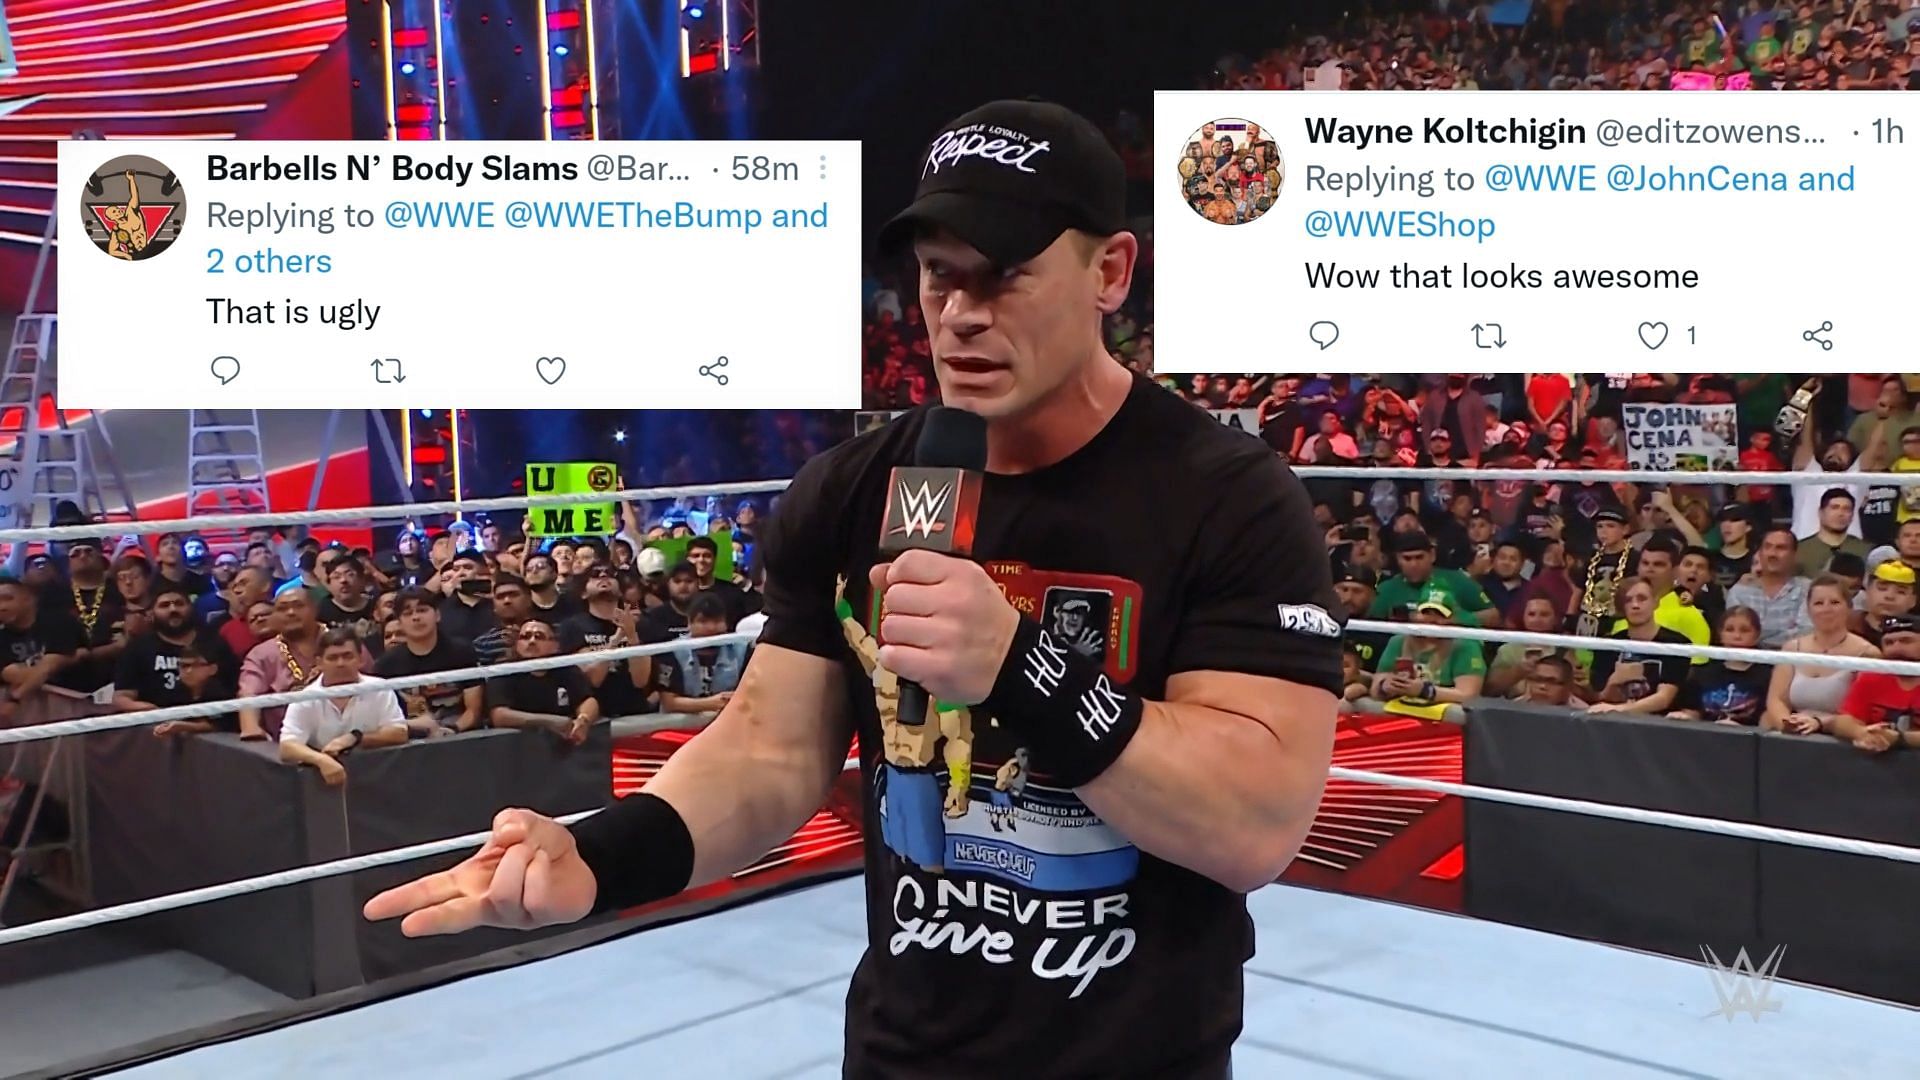 Fans have mixed reactions to the new WWE custom John Cena Championship belt